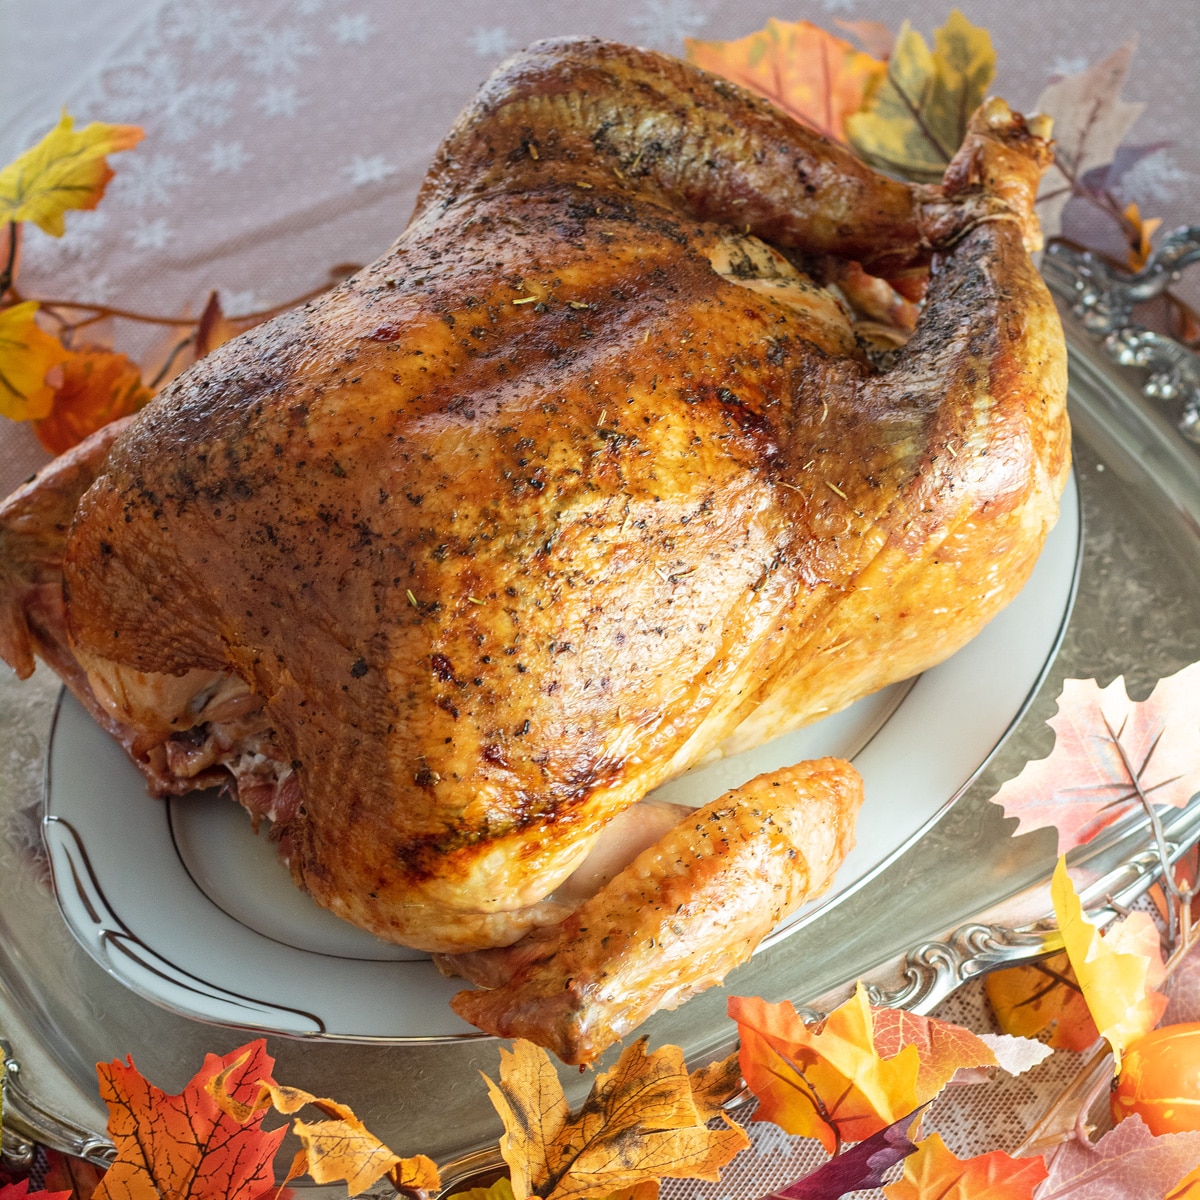 Side view of the herbes de provence roasted turkey on platter with fall foliage decor.